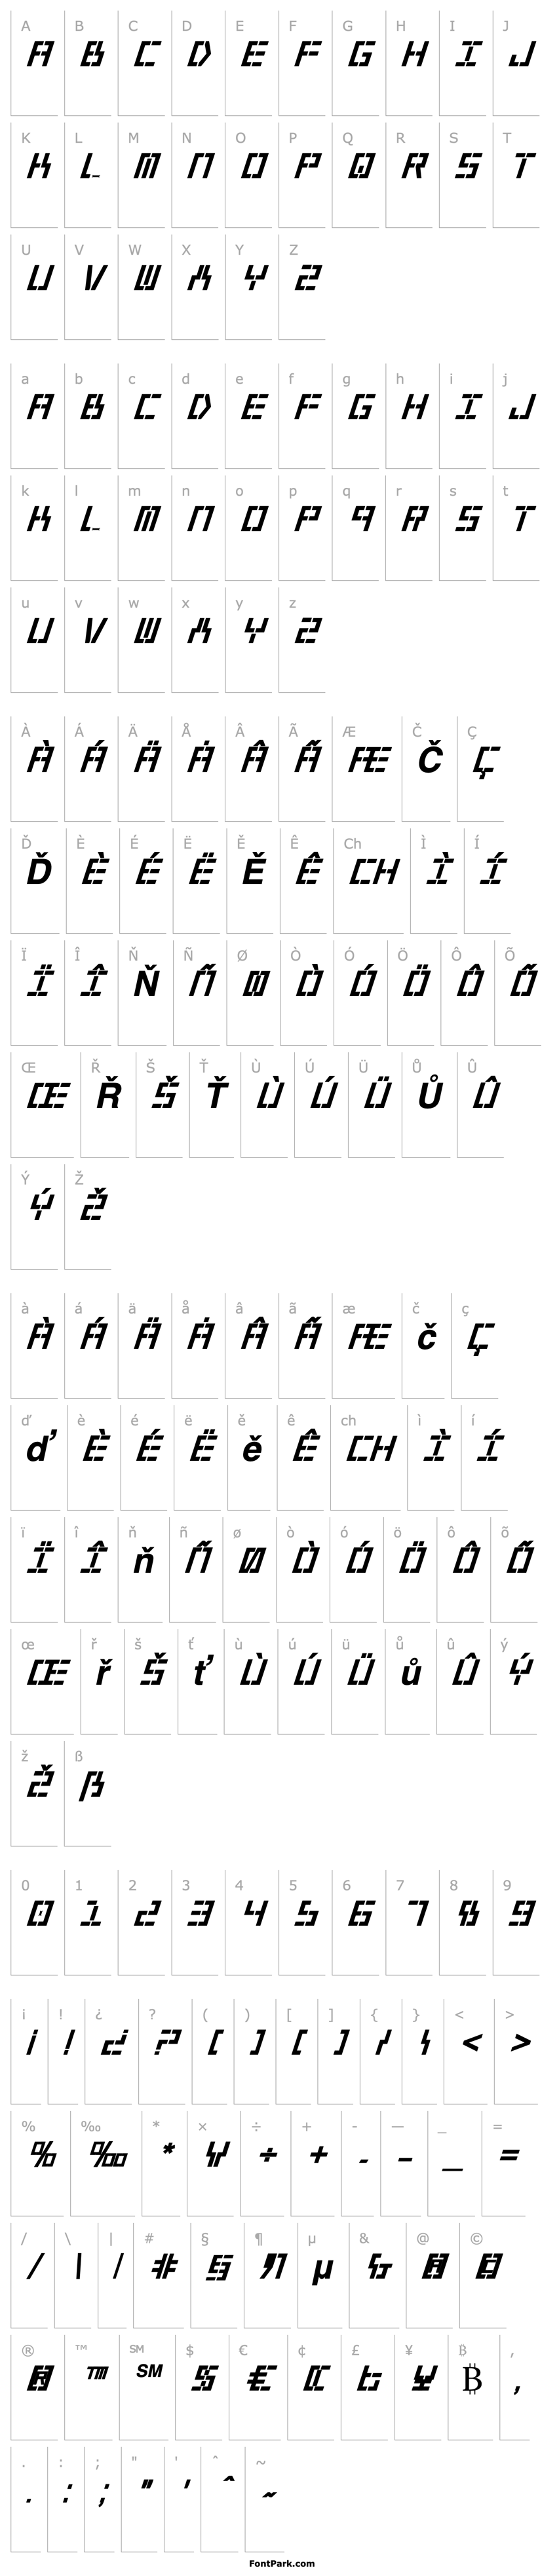 Overview Year 2000 Bold Italic